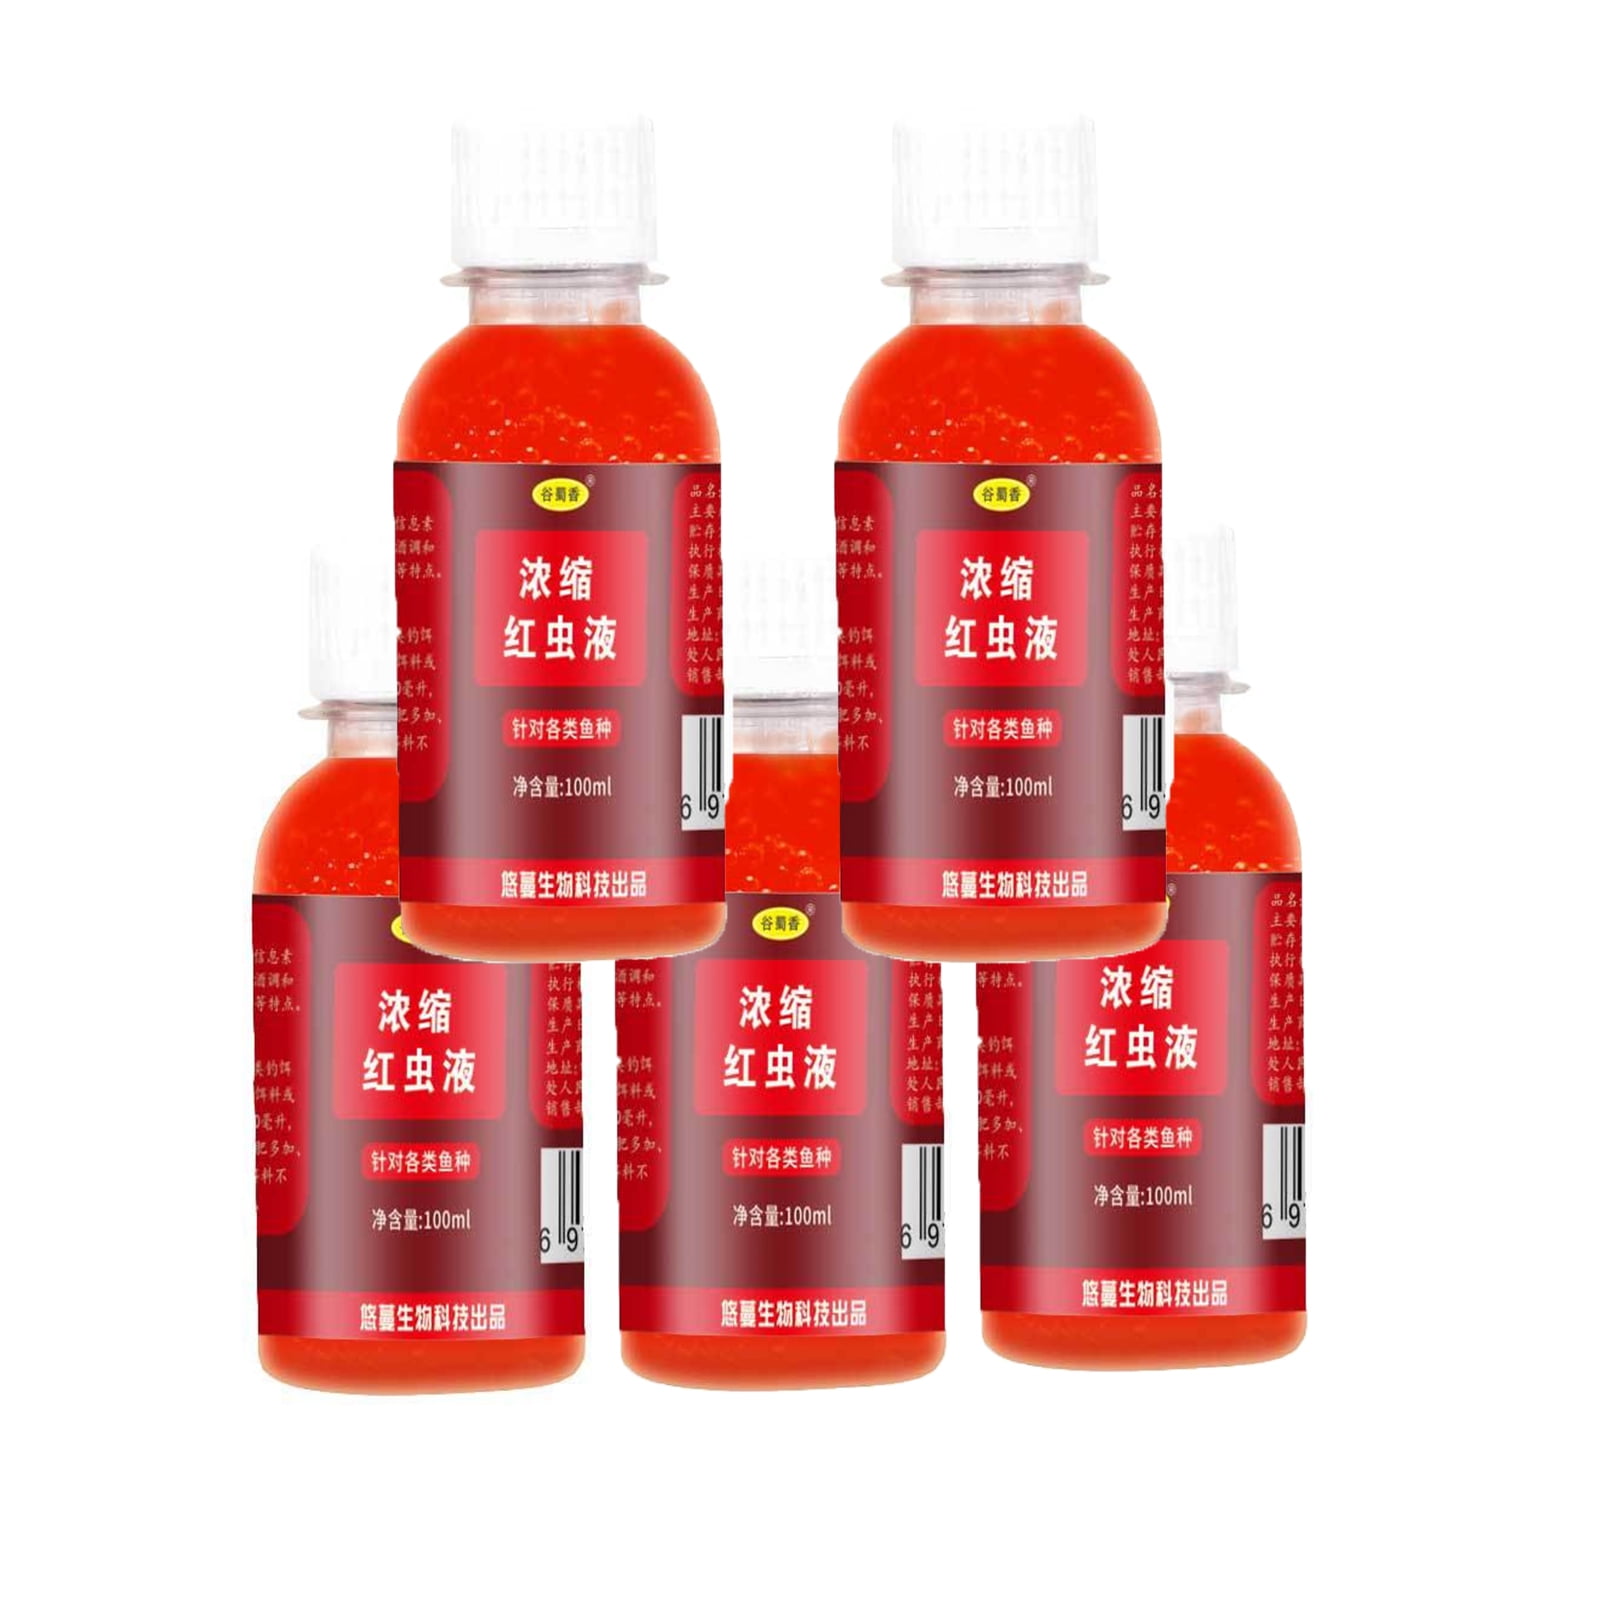 Chamoist Red40 Fishing Liquid,Fish Attractant,Red Worm Scent Fish  Attractants For Baits,Strong Fish Attractant High Concentrated Red Worm  Liquid Bait